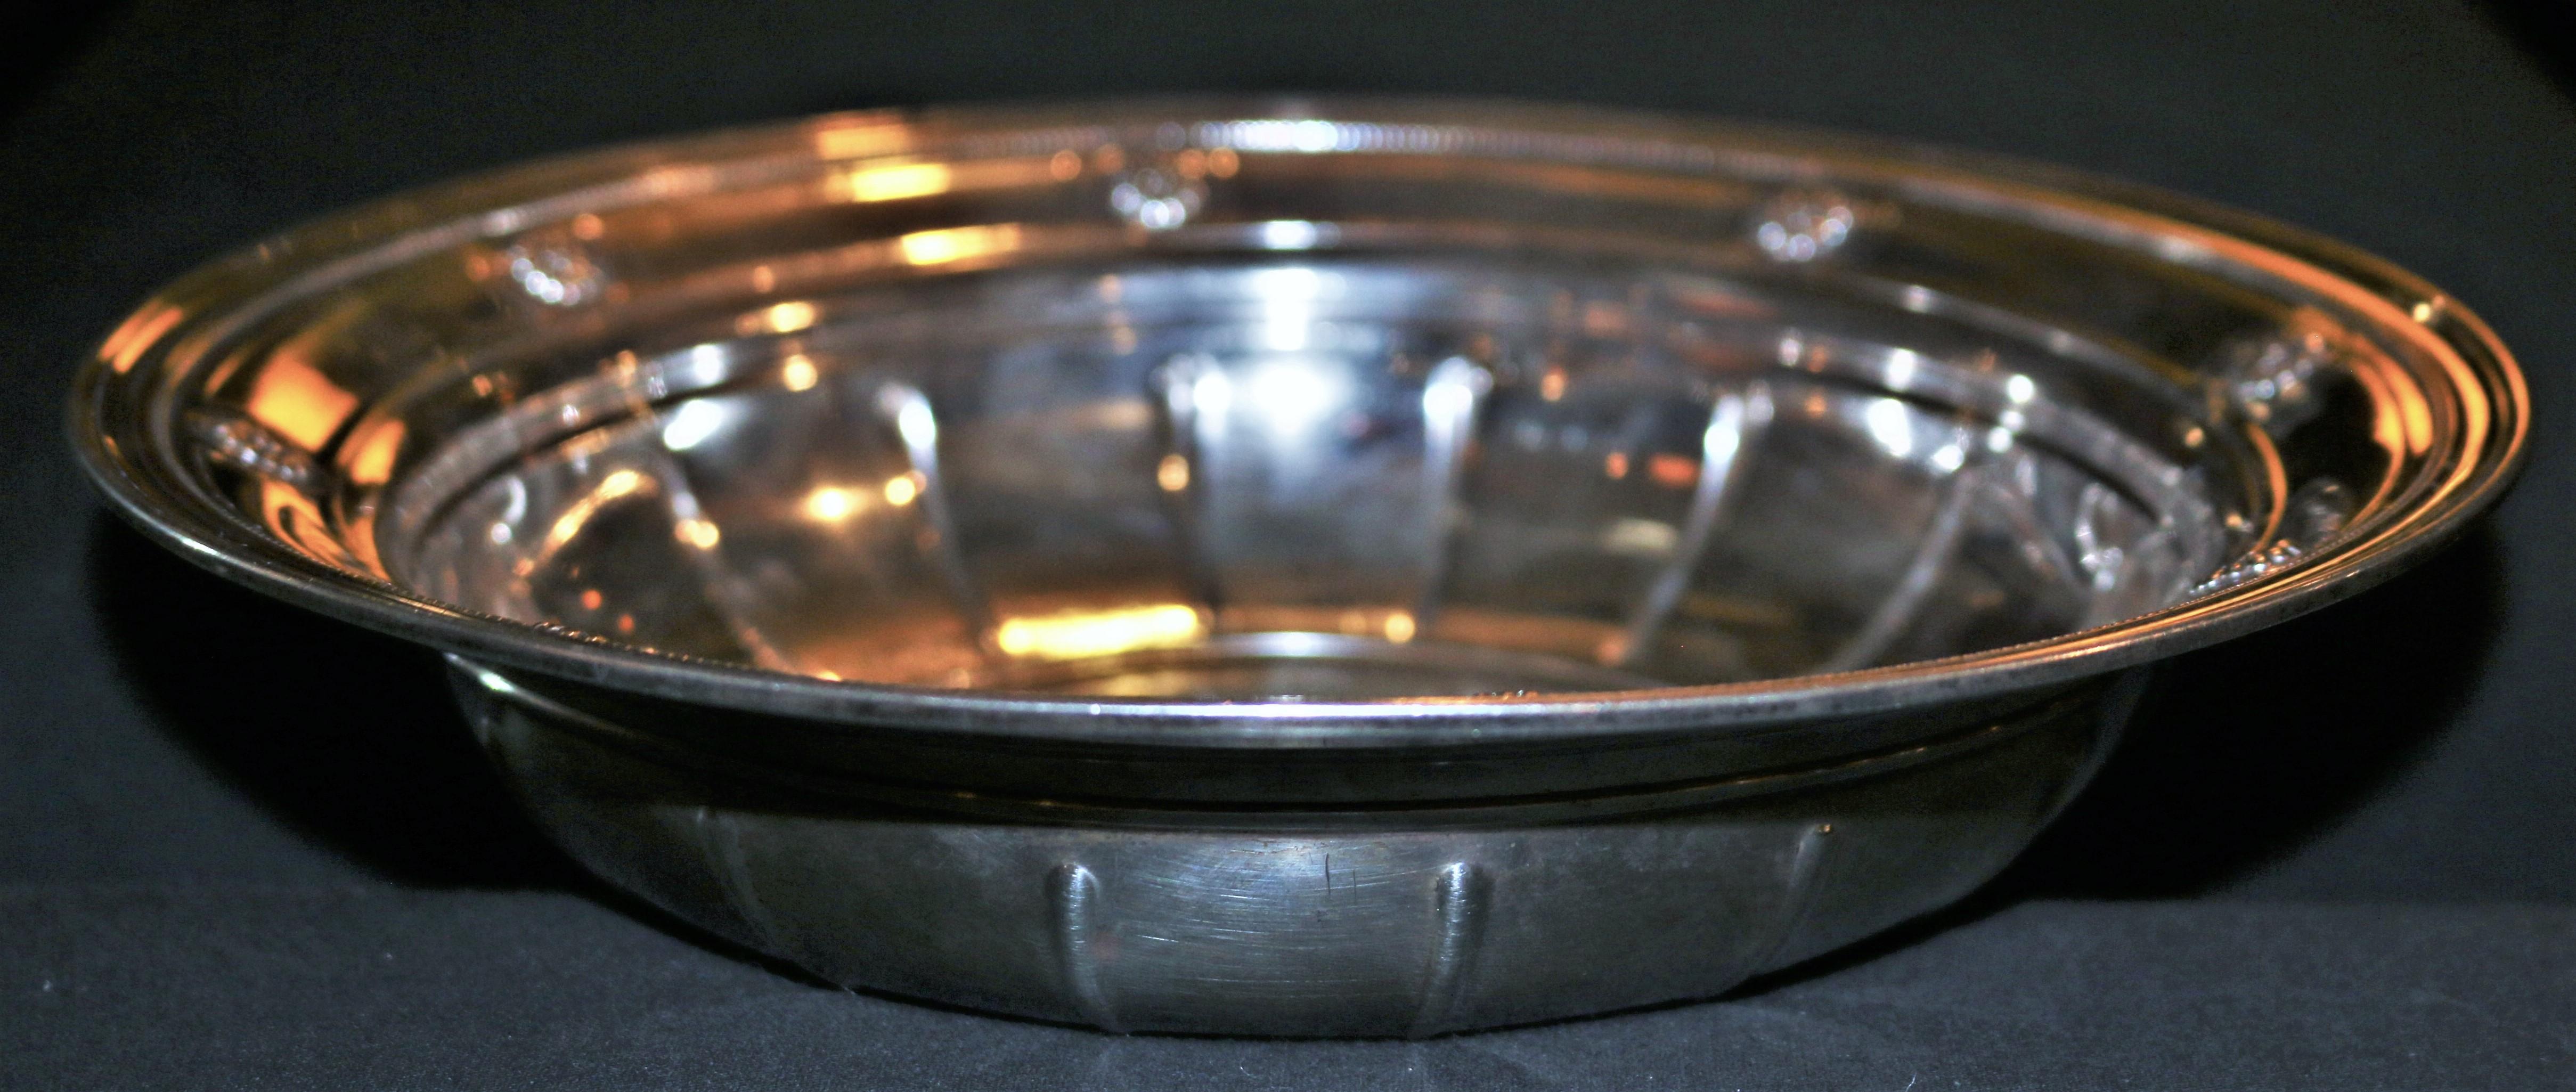 A 1920s Tiffany & Co. sterling silver scalloped low bowl or dish. Marked Tiffany & Co. makers Sterling Silver 925-10000.
A floral design with 8 flowers around the inner rim of the bowl.
The bottom of the bowl has ridges adding aesthetic value to